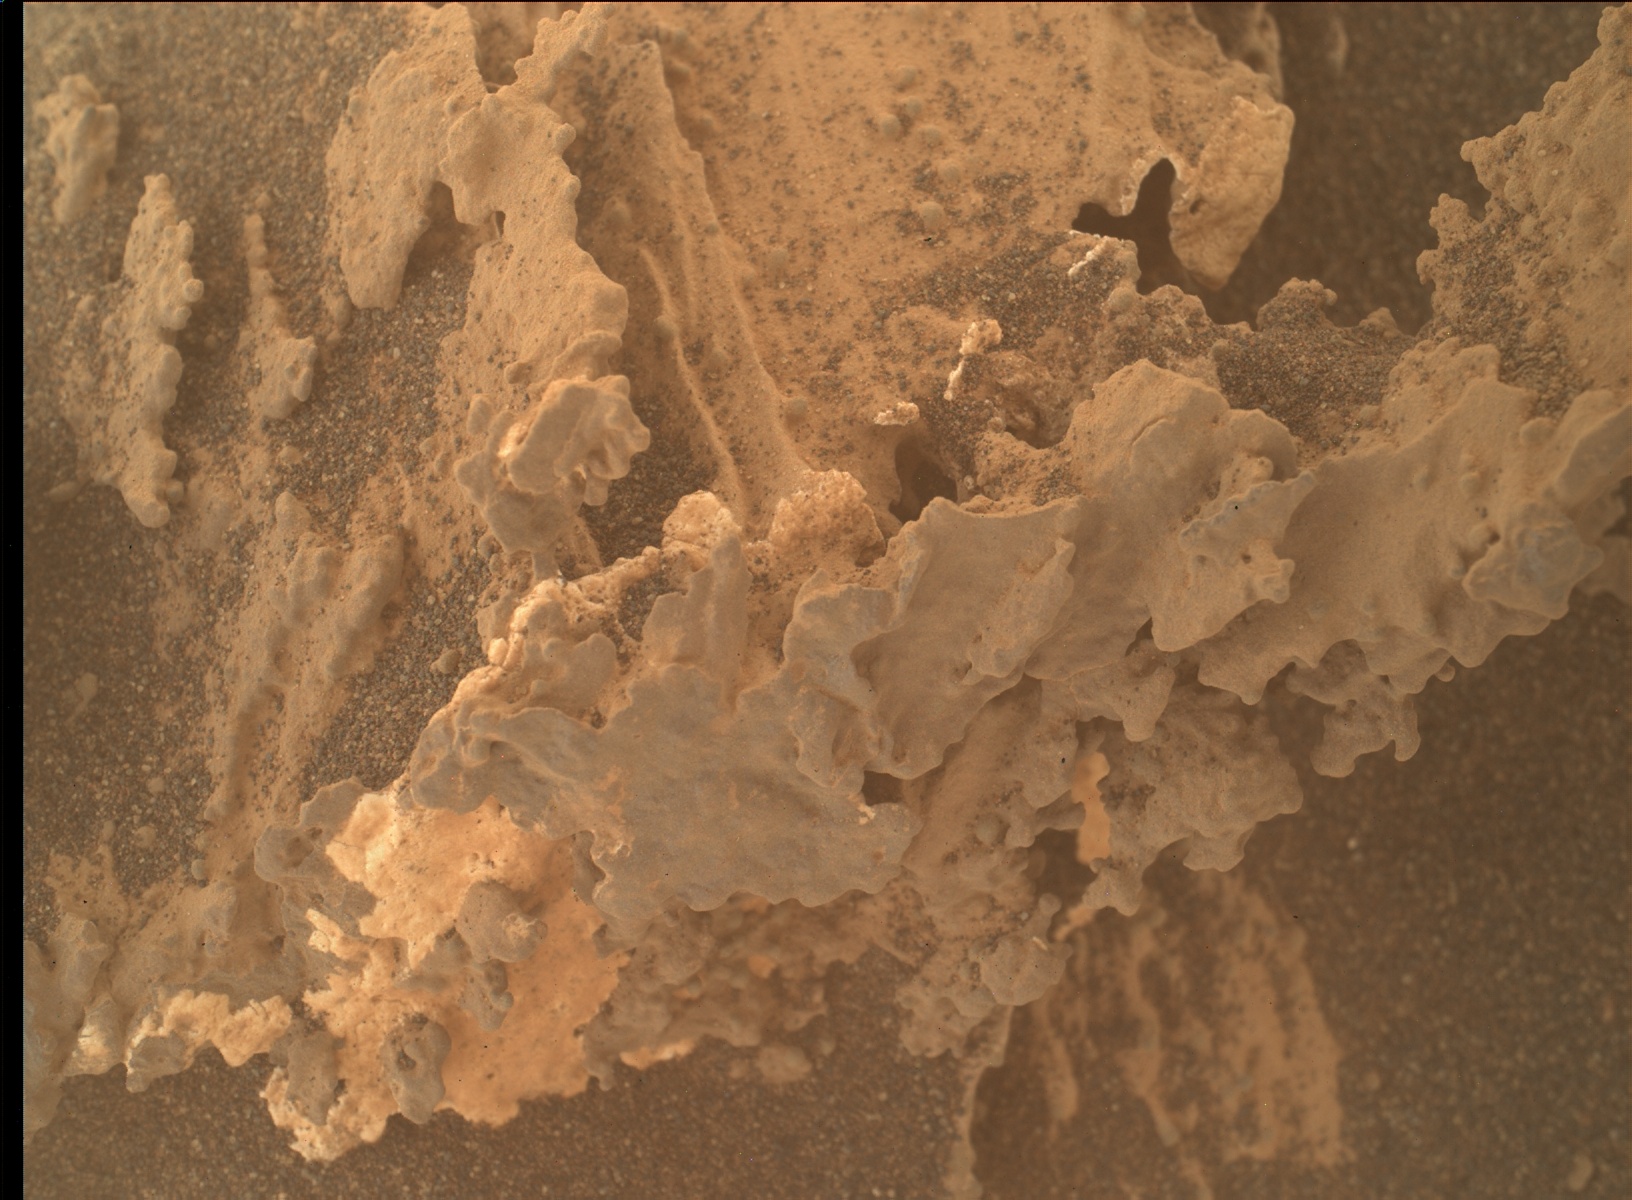 Nasa's Mars rover Curiosity acquired this image using its Mars Hand Lens Imager (MAHLI) on Sol 3083